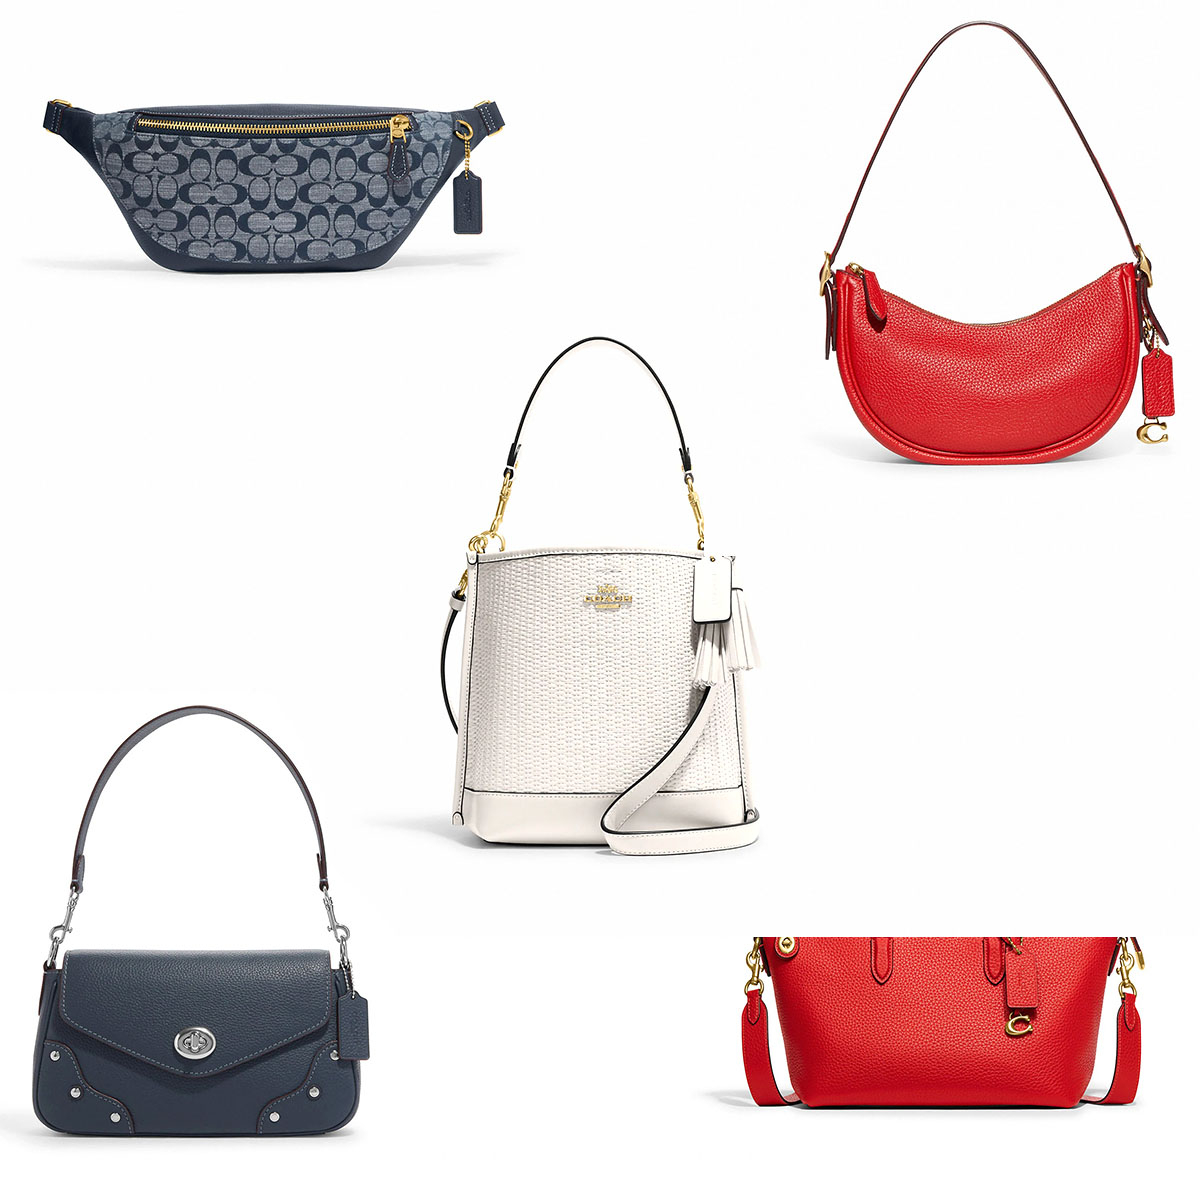 Coach items for 50% off: Affordable luxury bags, shoes